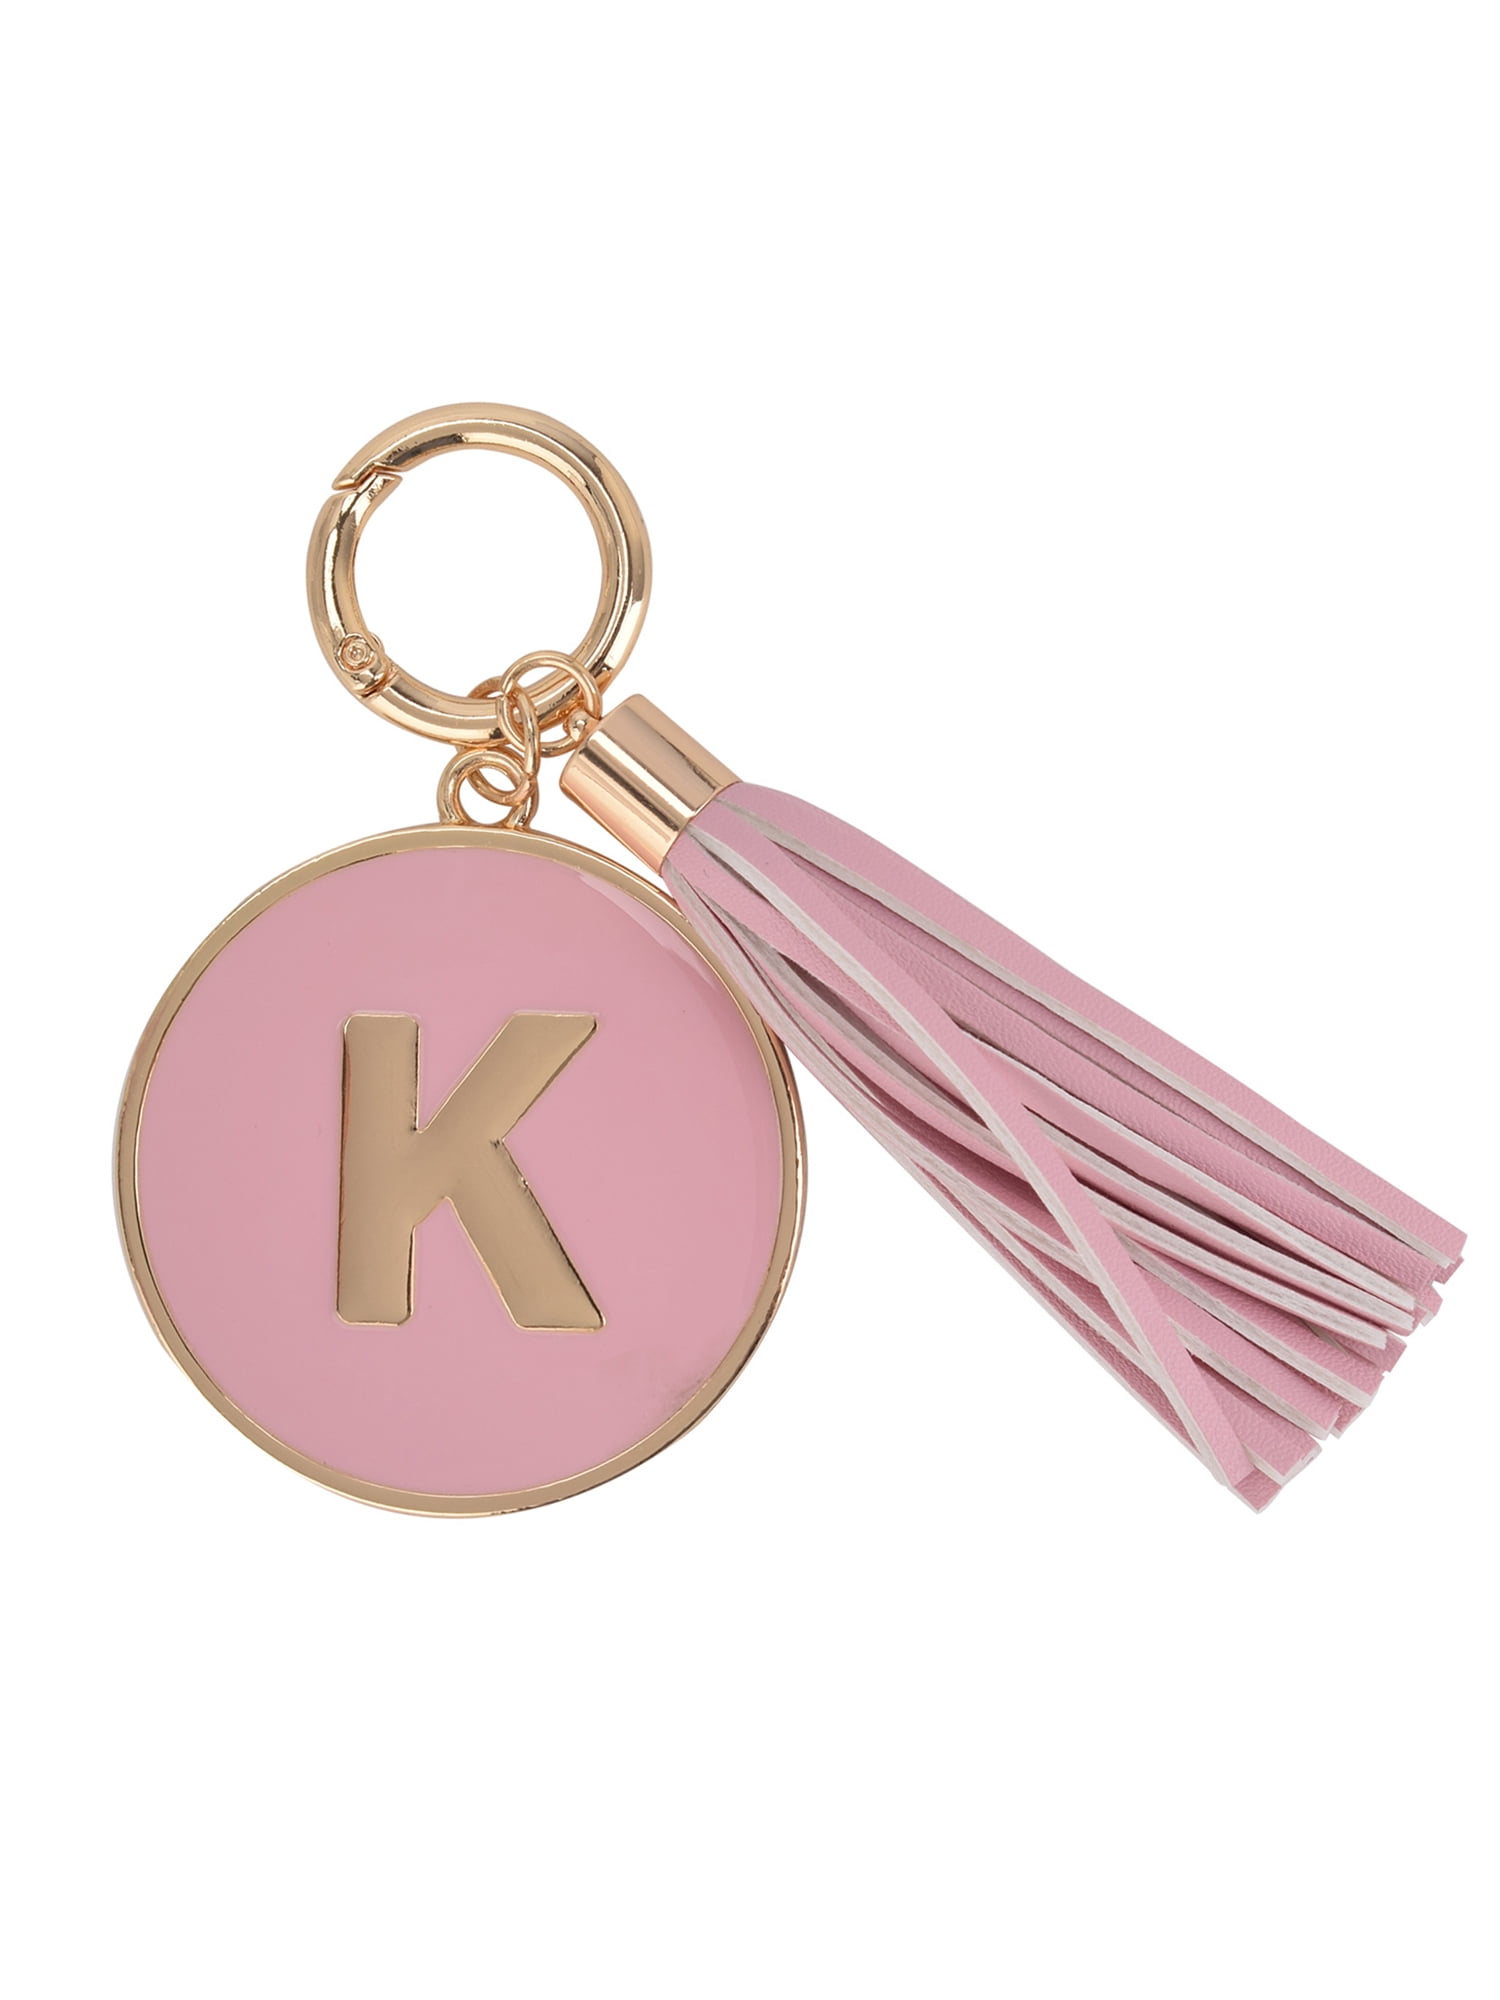 Time and Tru Gold/Pink "K" Initial Bag Charm, Adult Women's